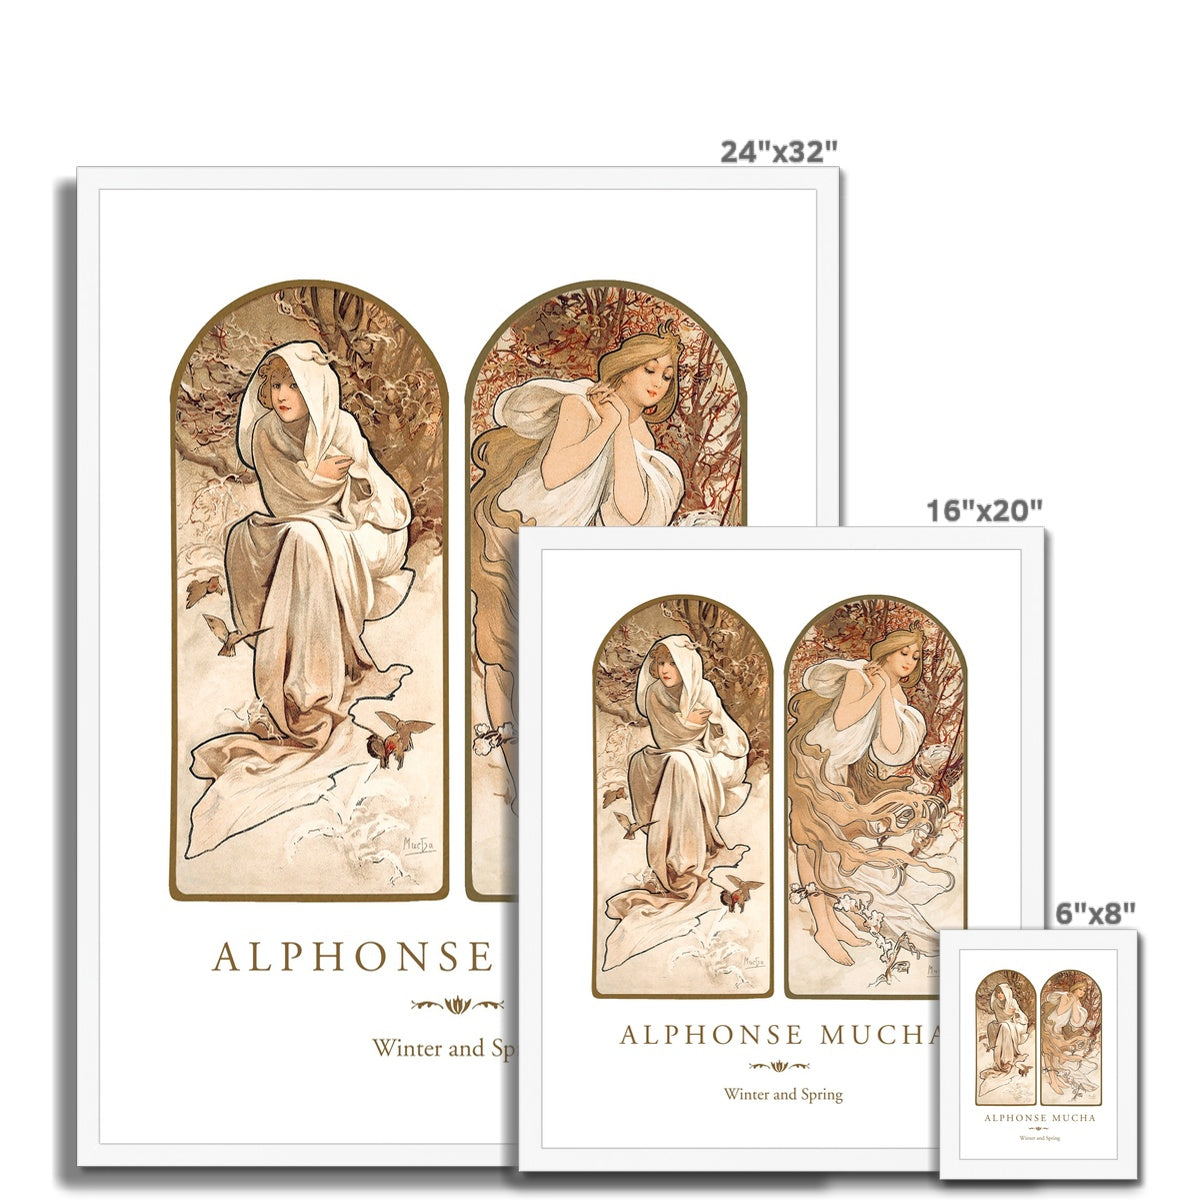 Mucha - Winter and Spring gerahmtes Poster - Atopurinto